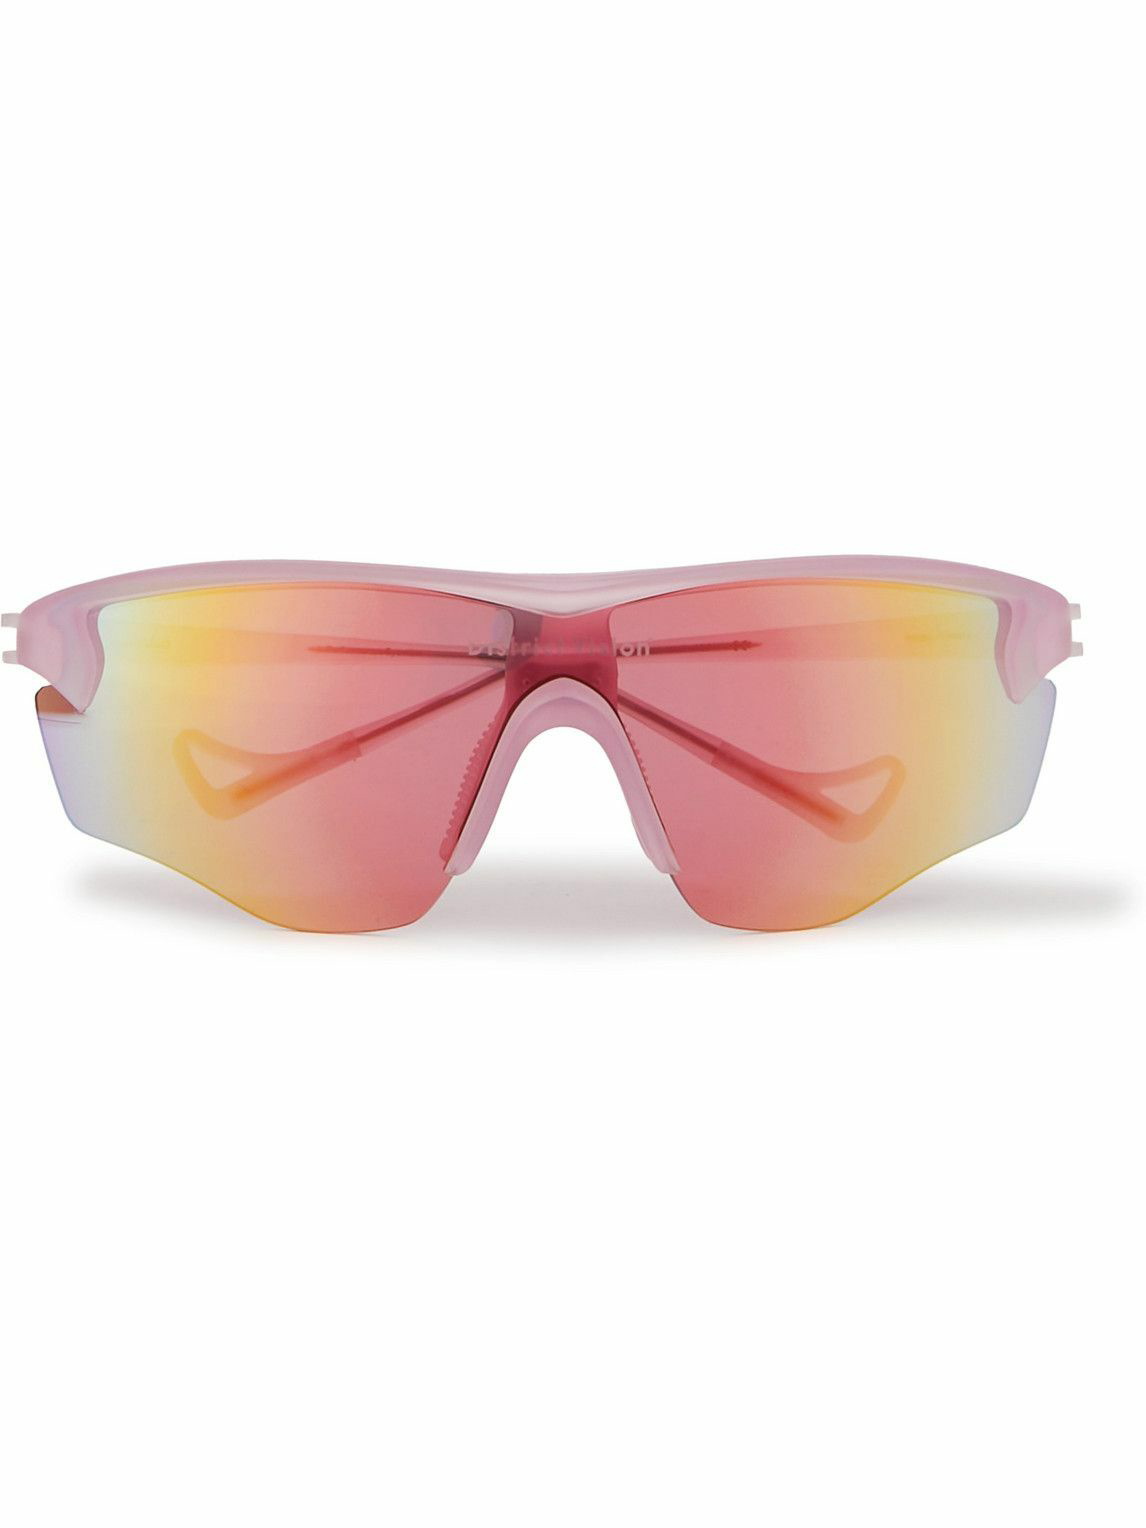 DISTRICT VISION - Nako Multisport D-Frame Acetate Sunglasses with ...